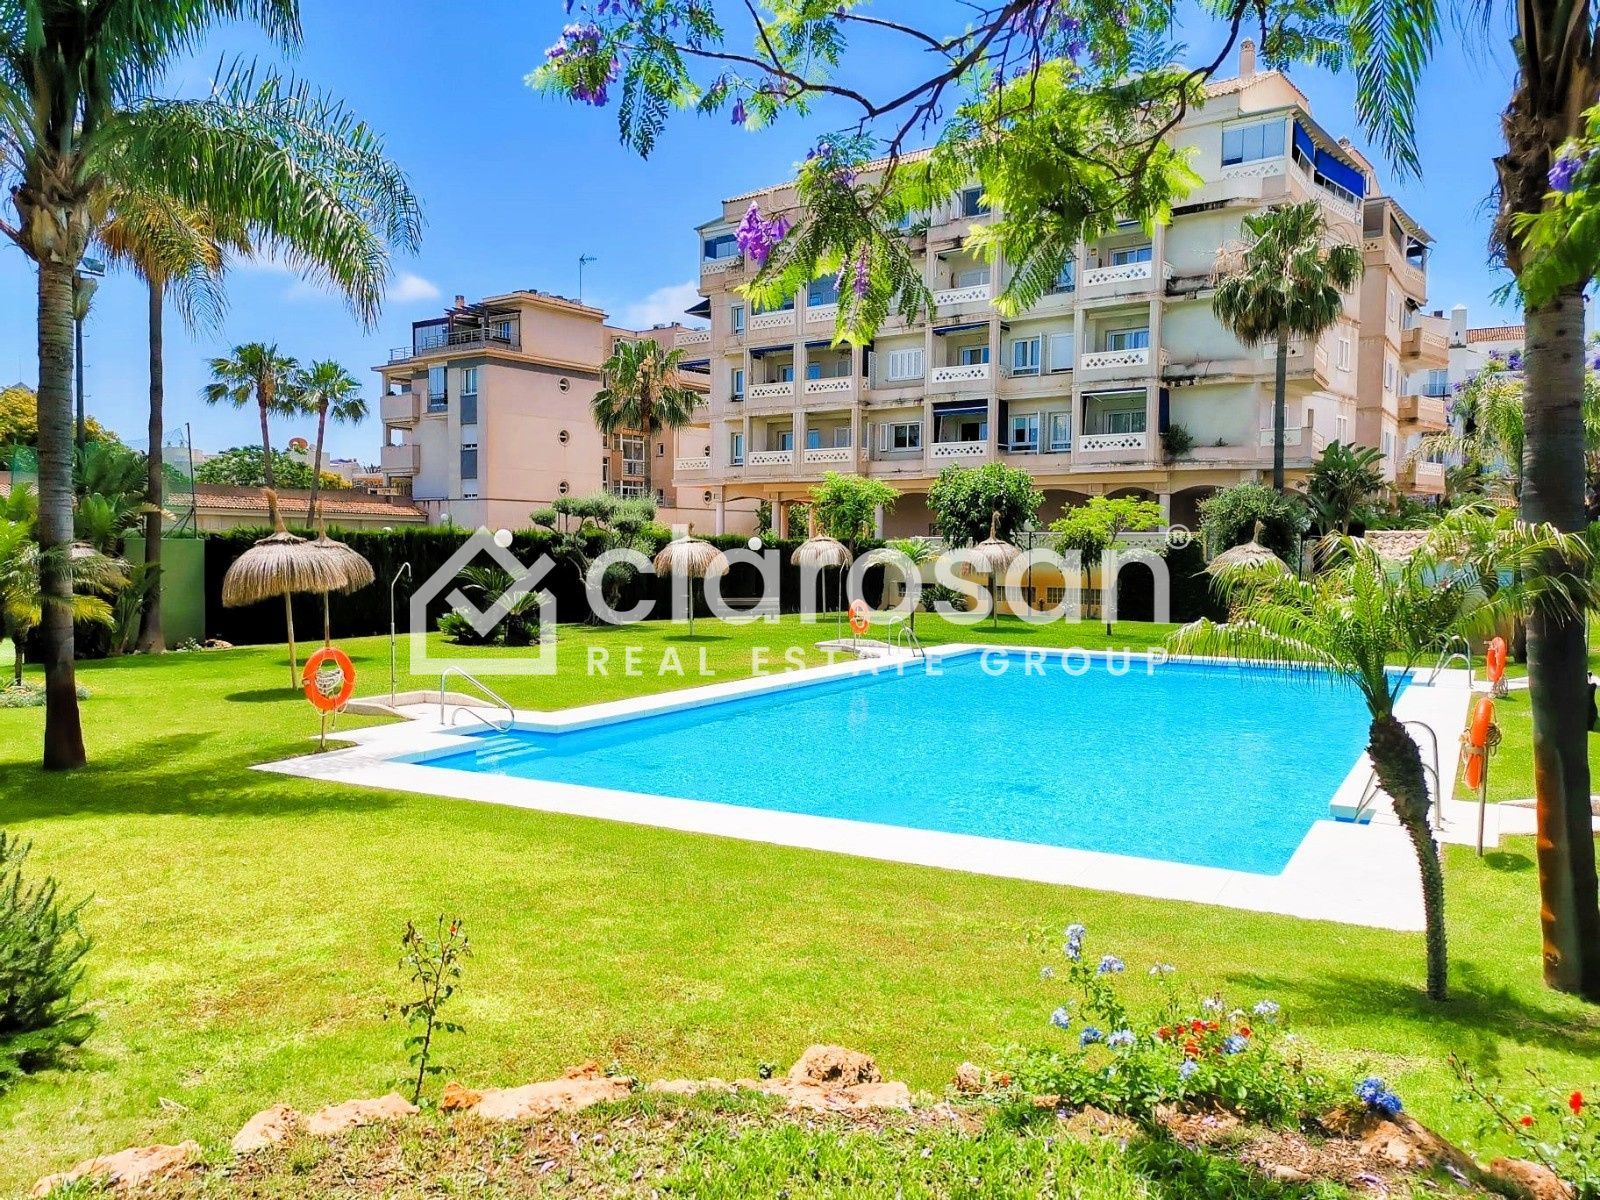 Penthouse in Torremolinos, for sale